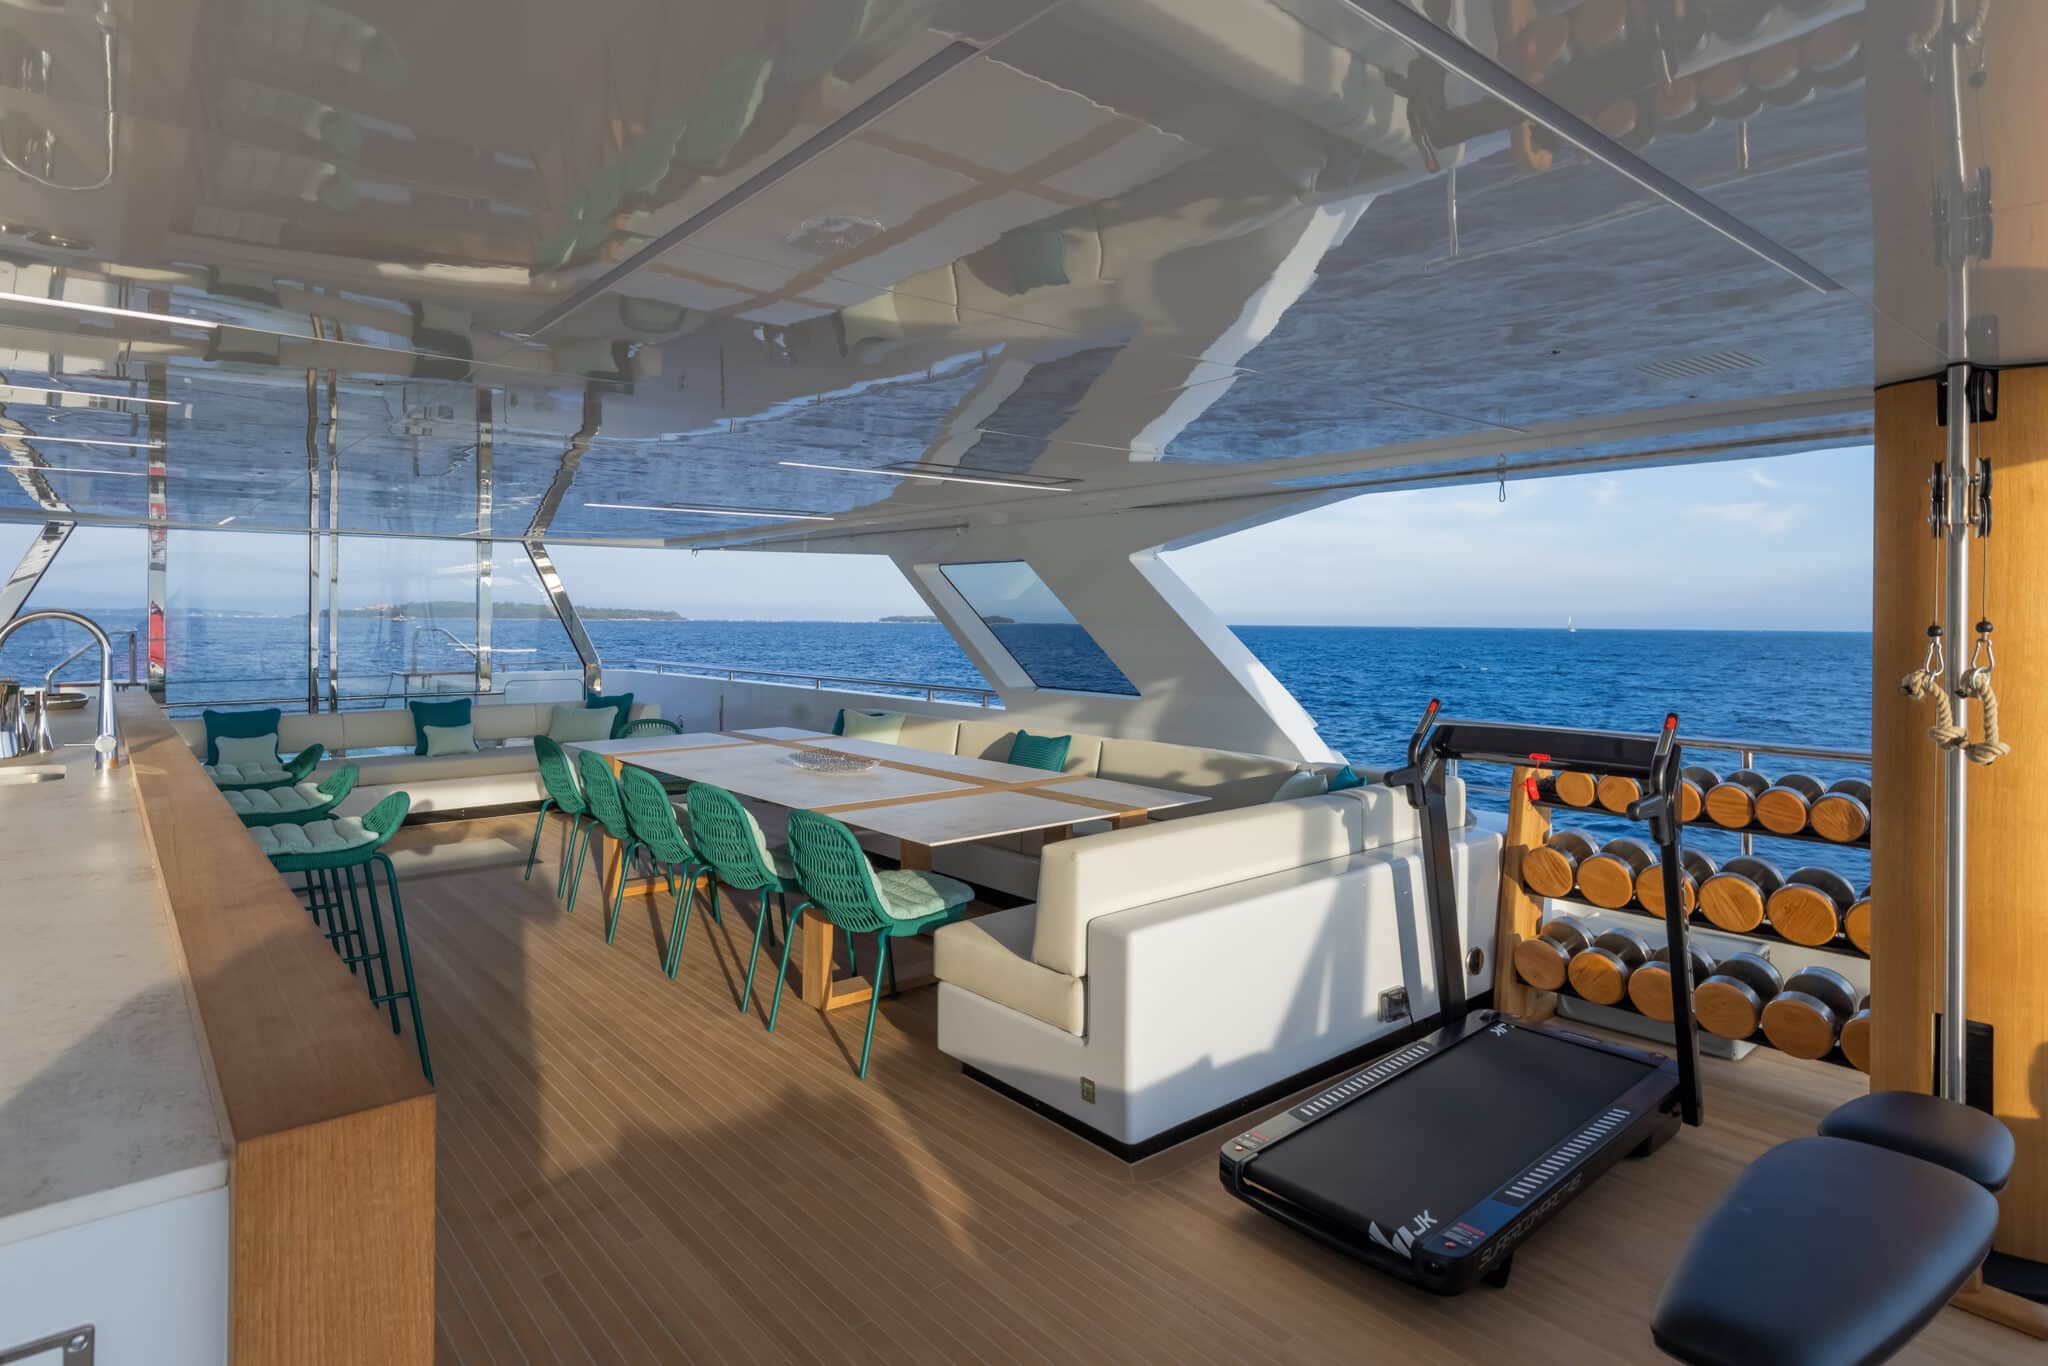 Image of RSY 38M EXP EMOCEAN Sundeck 01 scaled 1 in Emocean by Rosetti Super Yacht - Cosentino